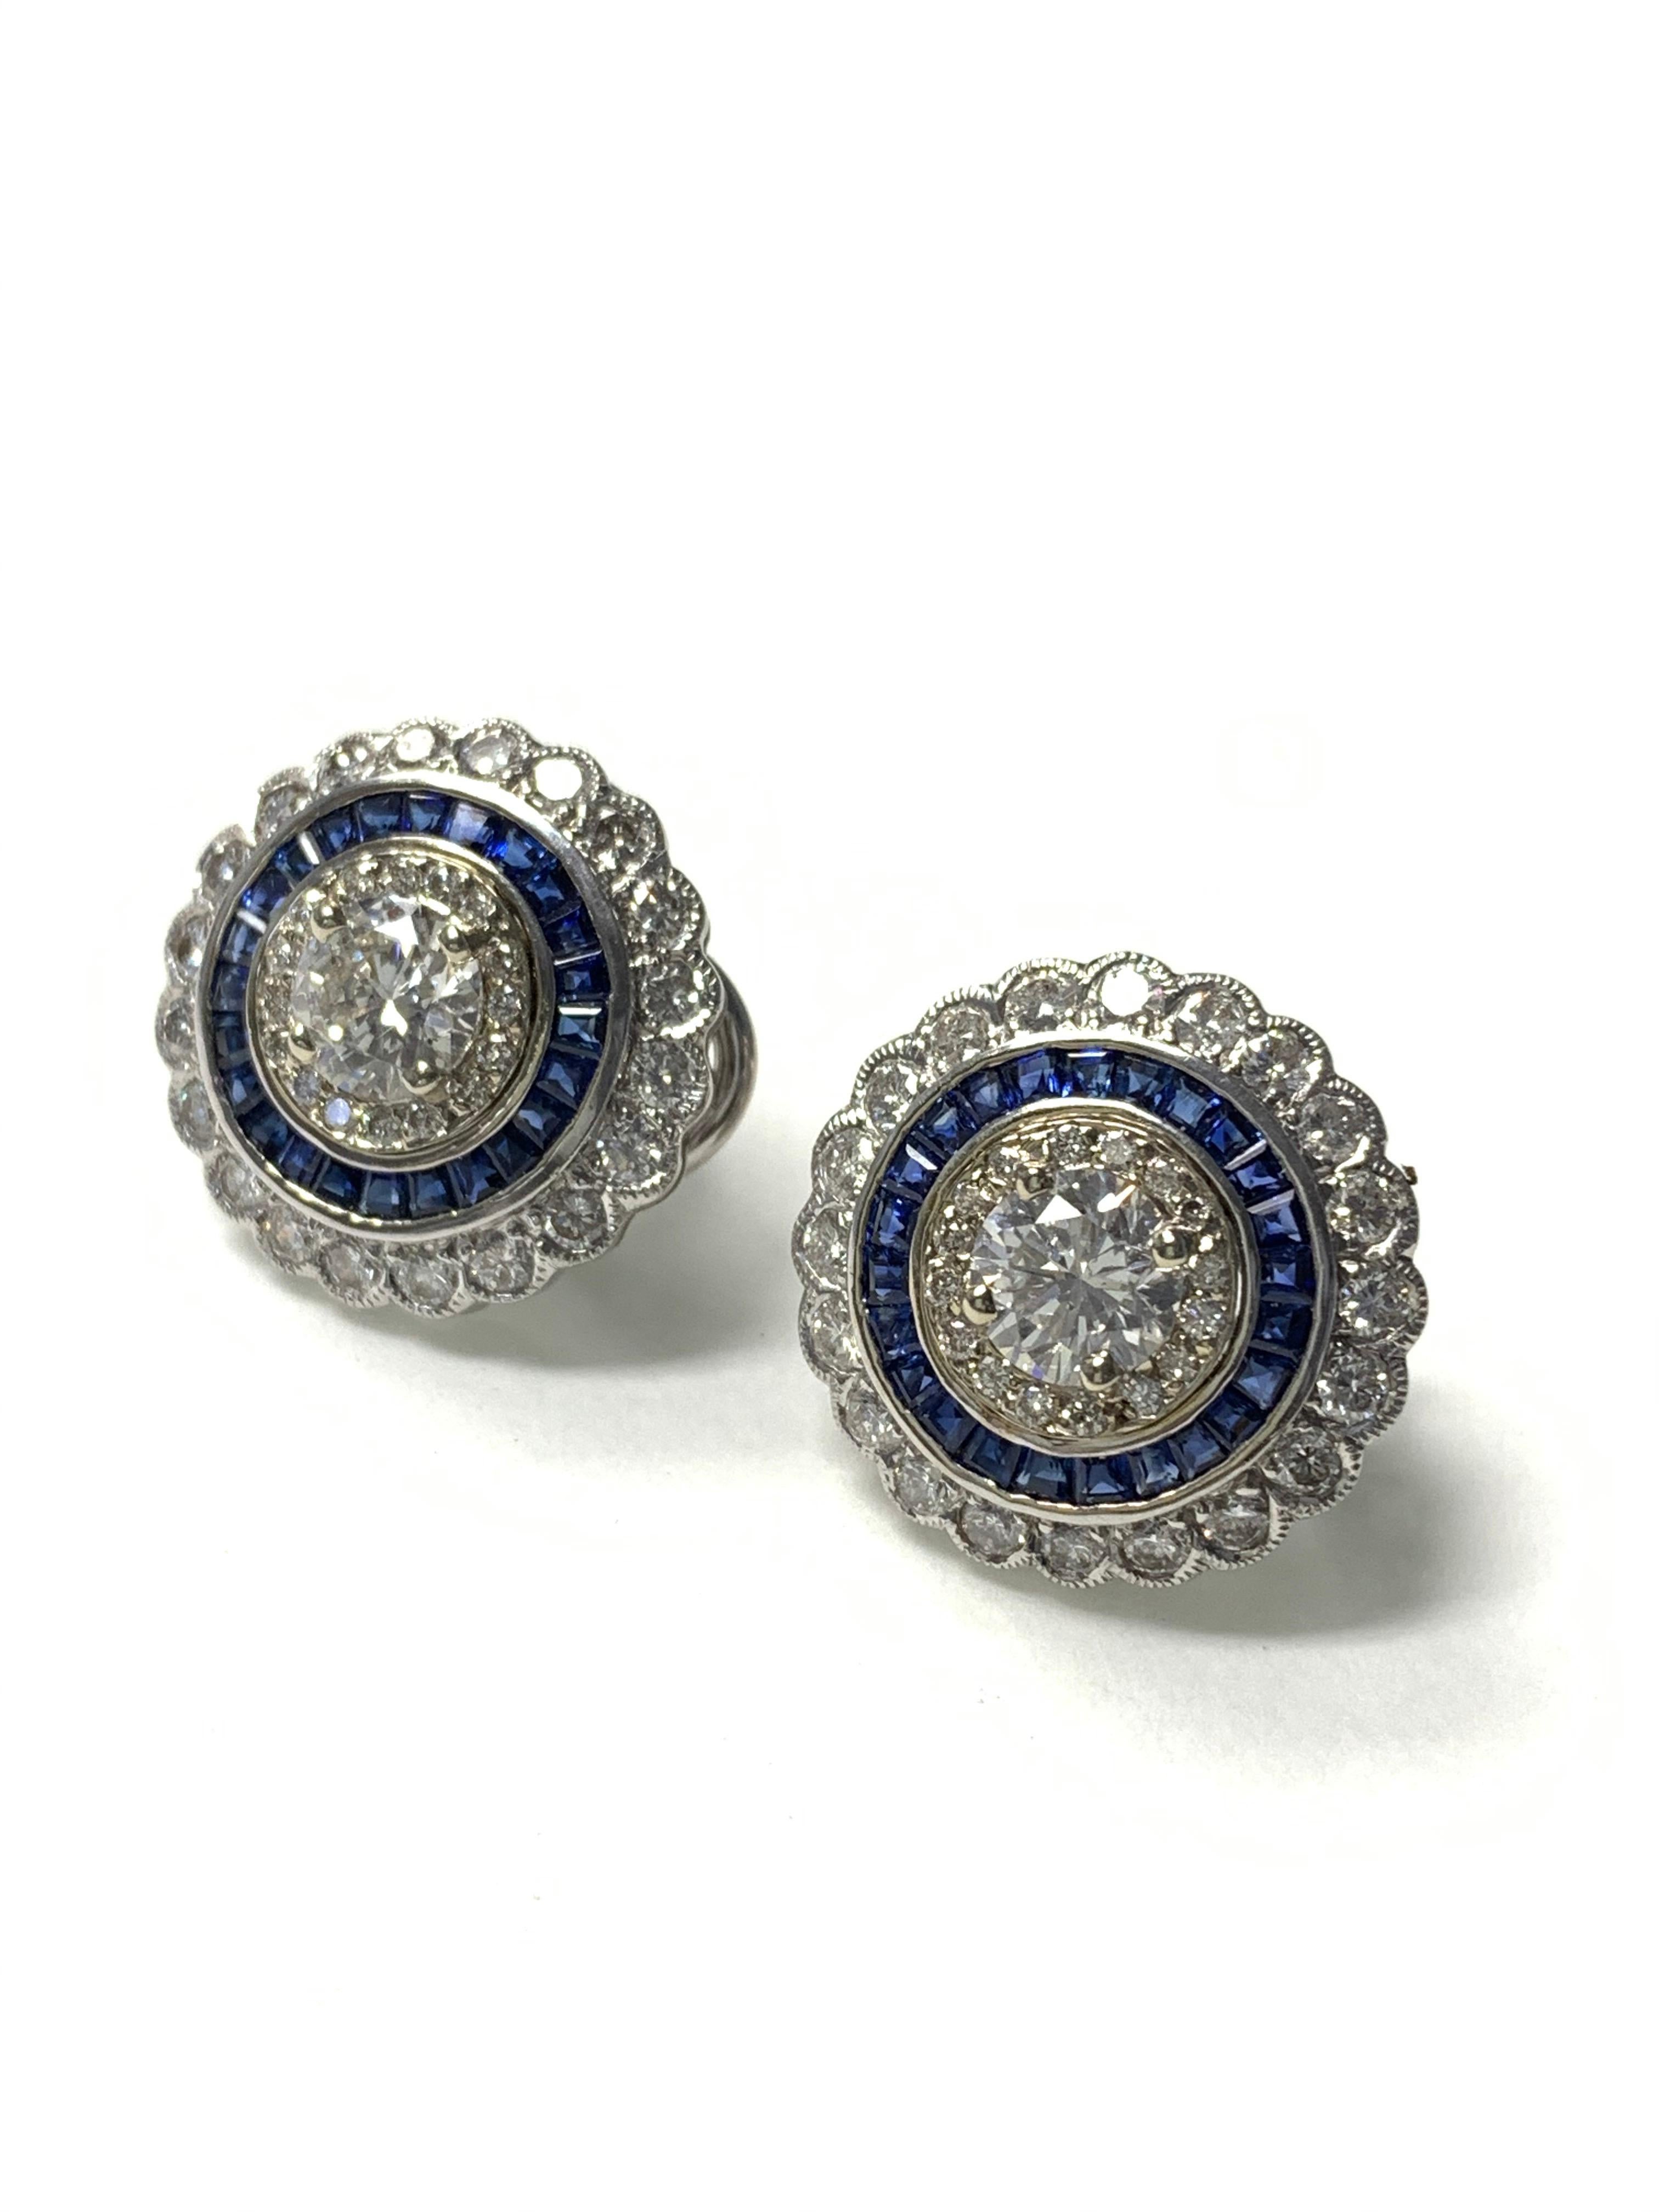 White Old European Cut Diamond and Blue Sapphire Stud Earrings in 18 Karat Gold For Sale 7